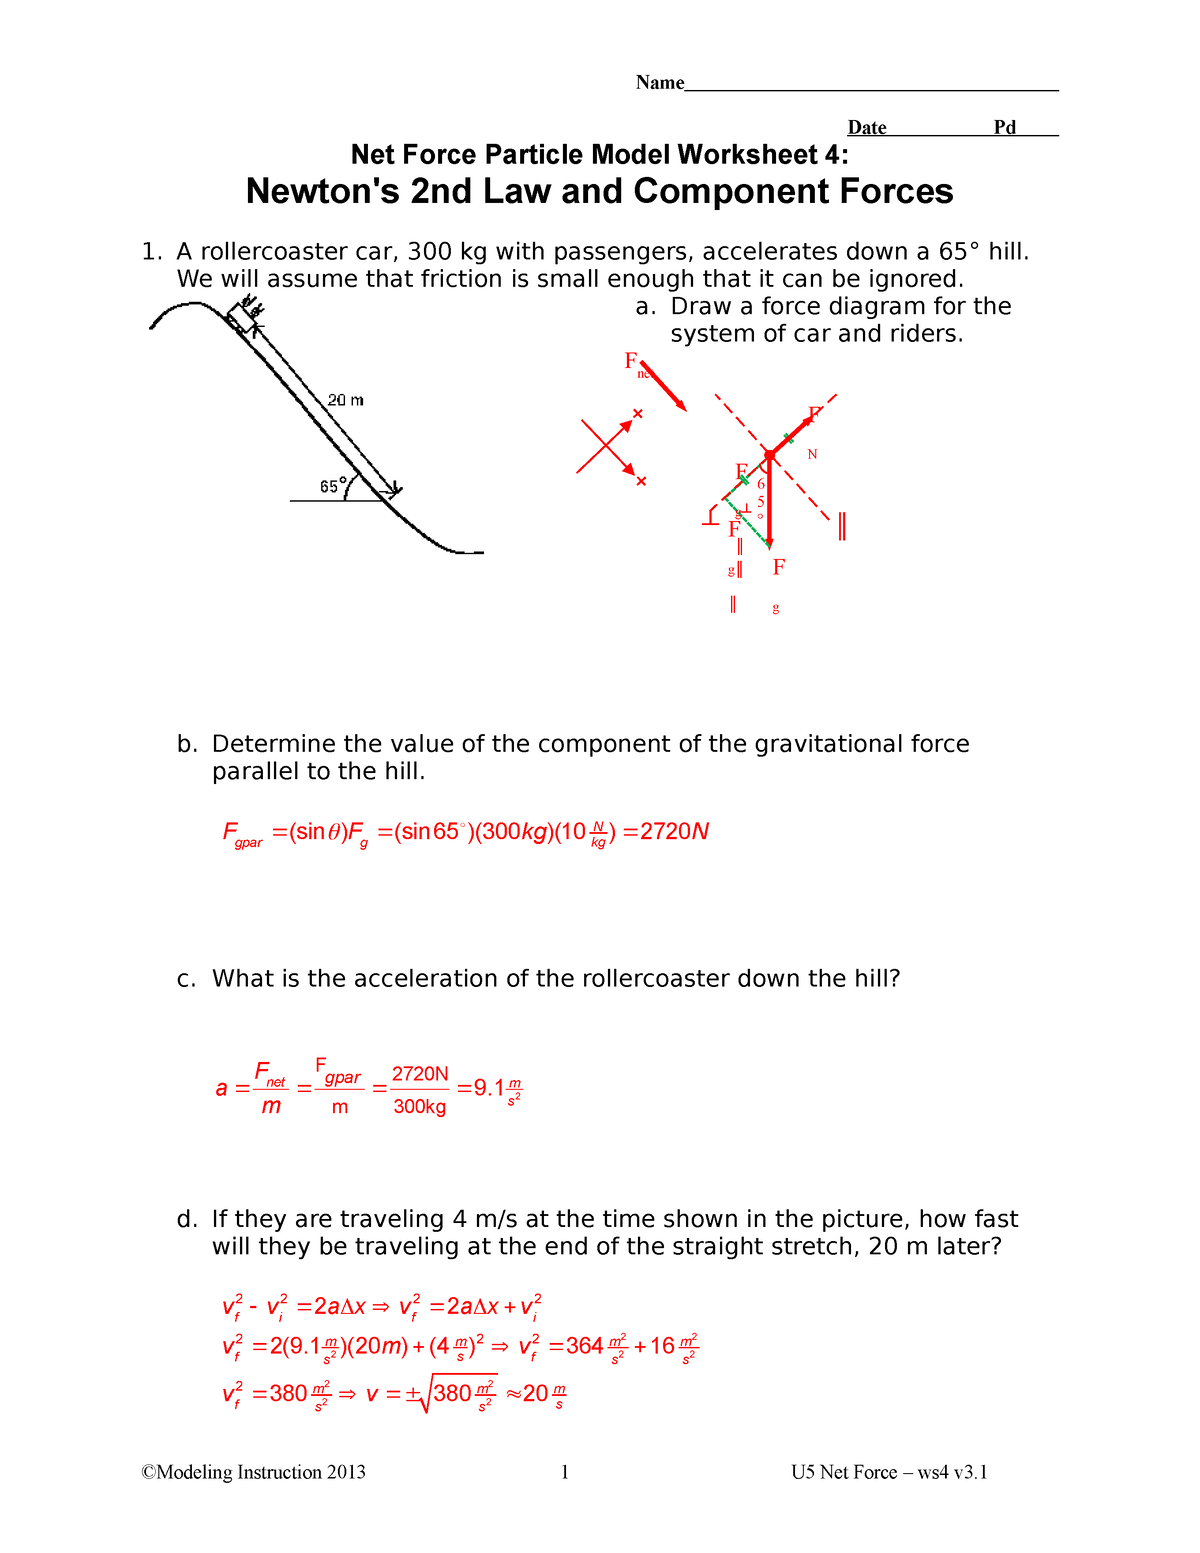 newton-second-law-w4-answers-4-name-date-pd-net-force-particle-model